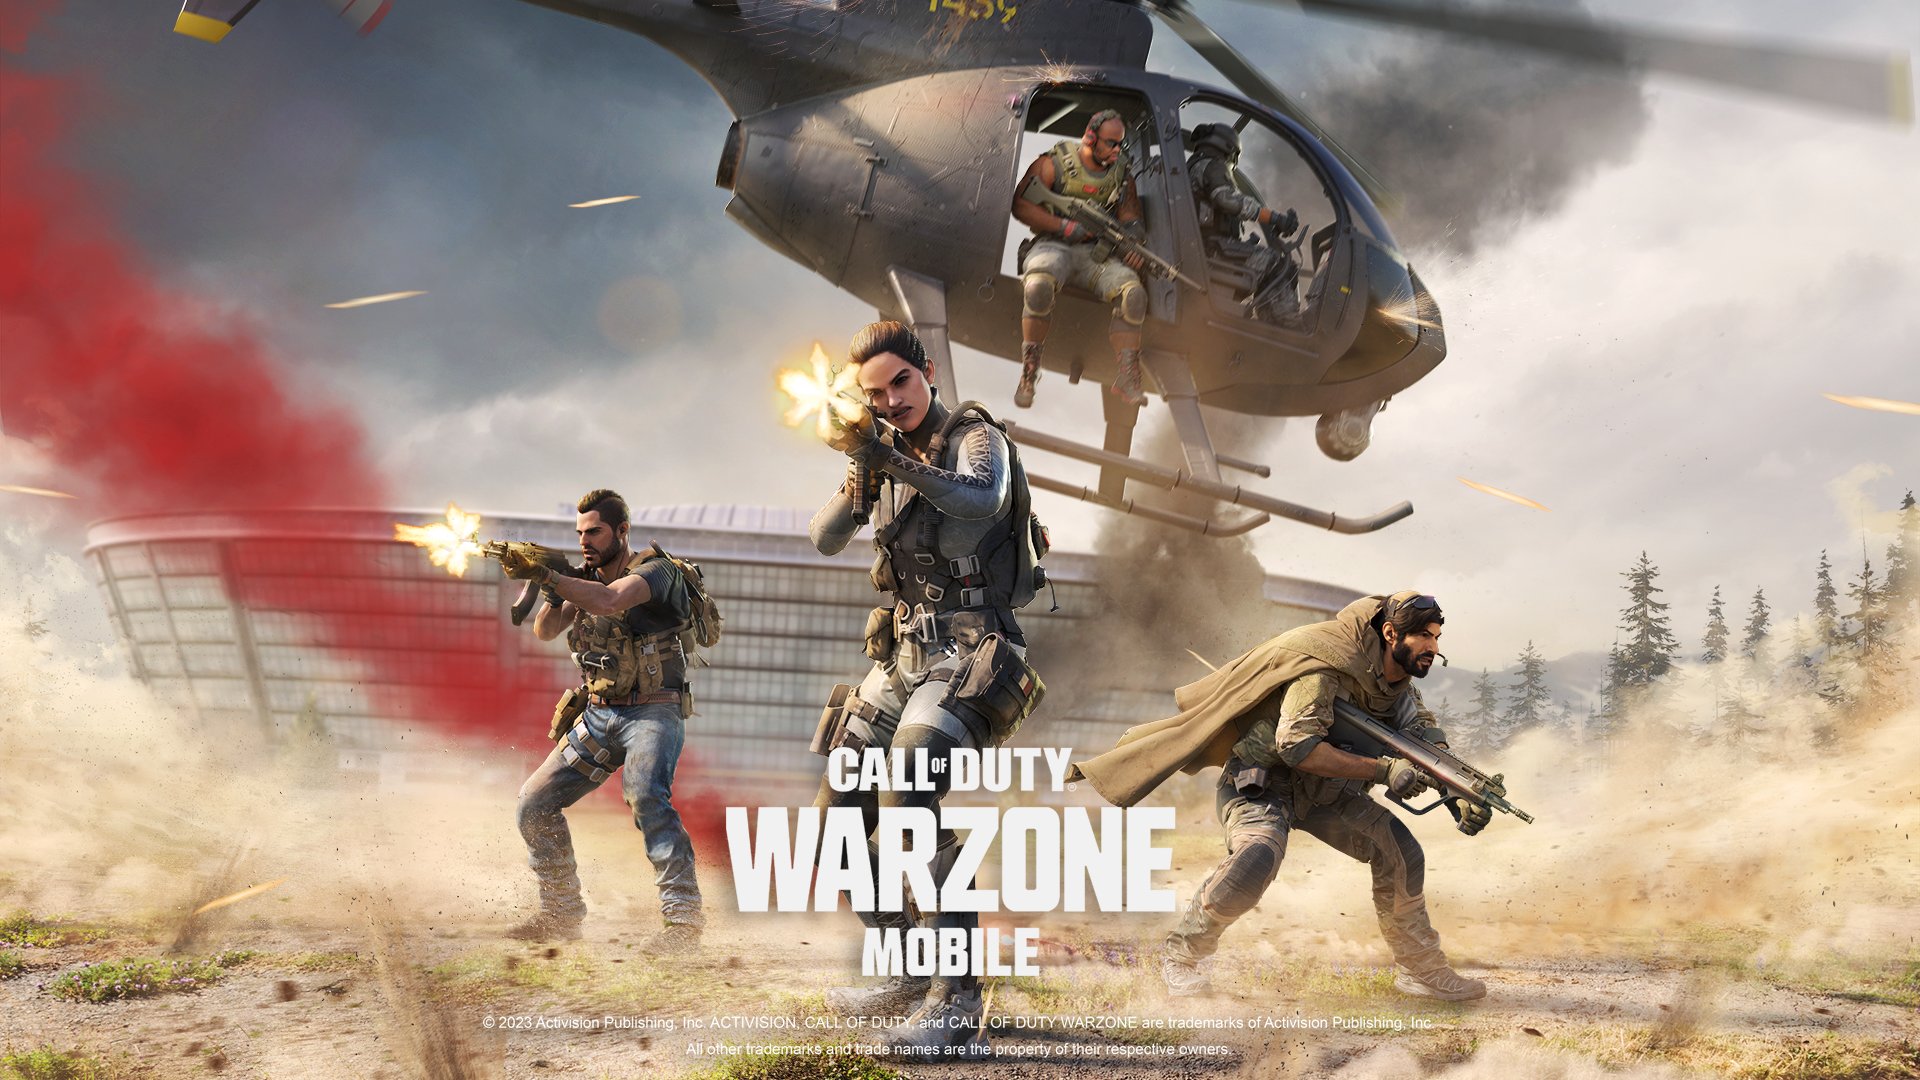 Call of Duty Warzone Mobile New Update - Season 3